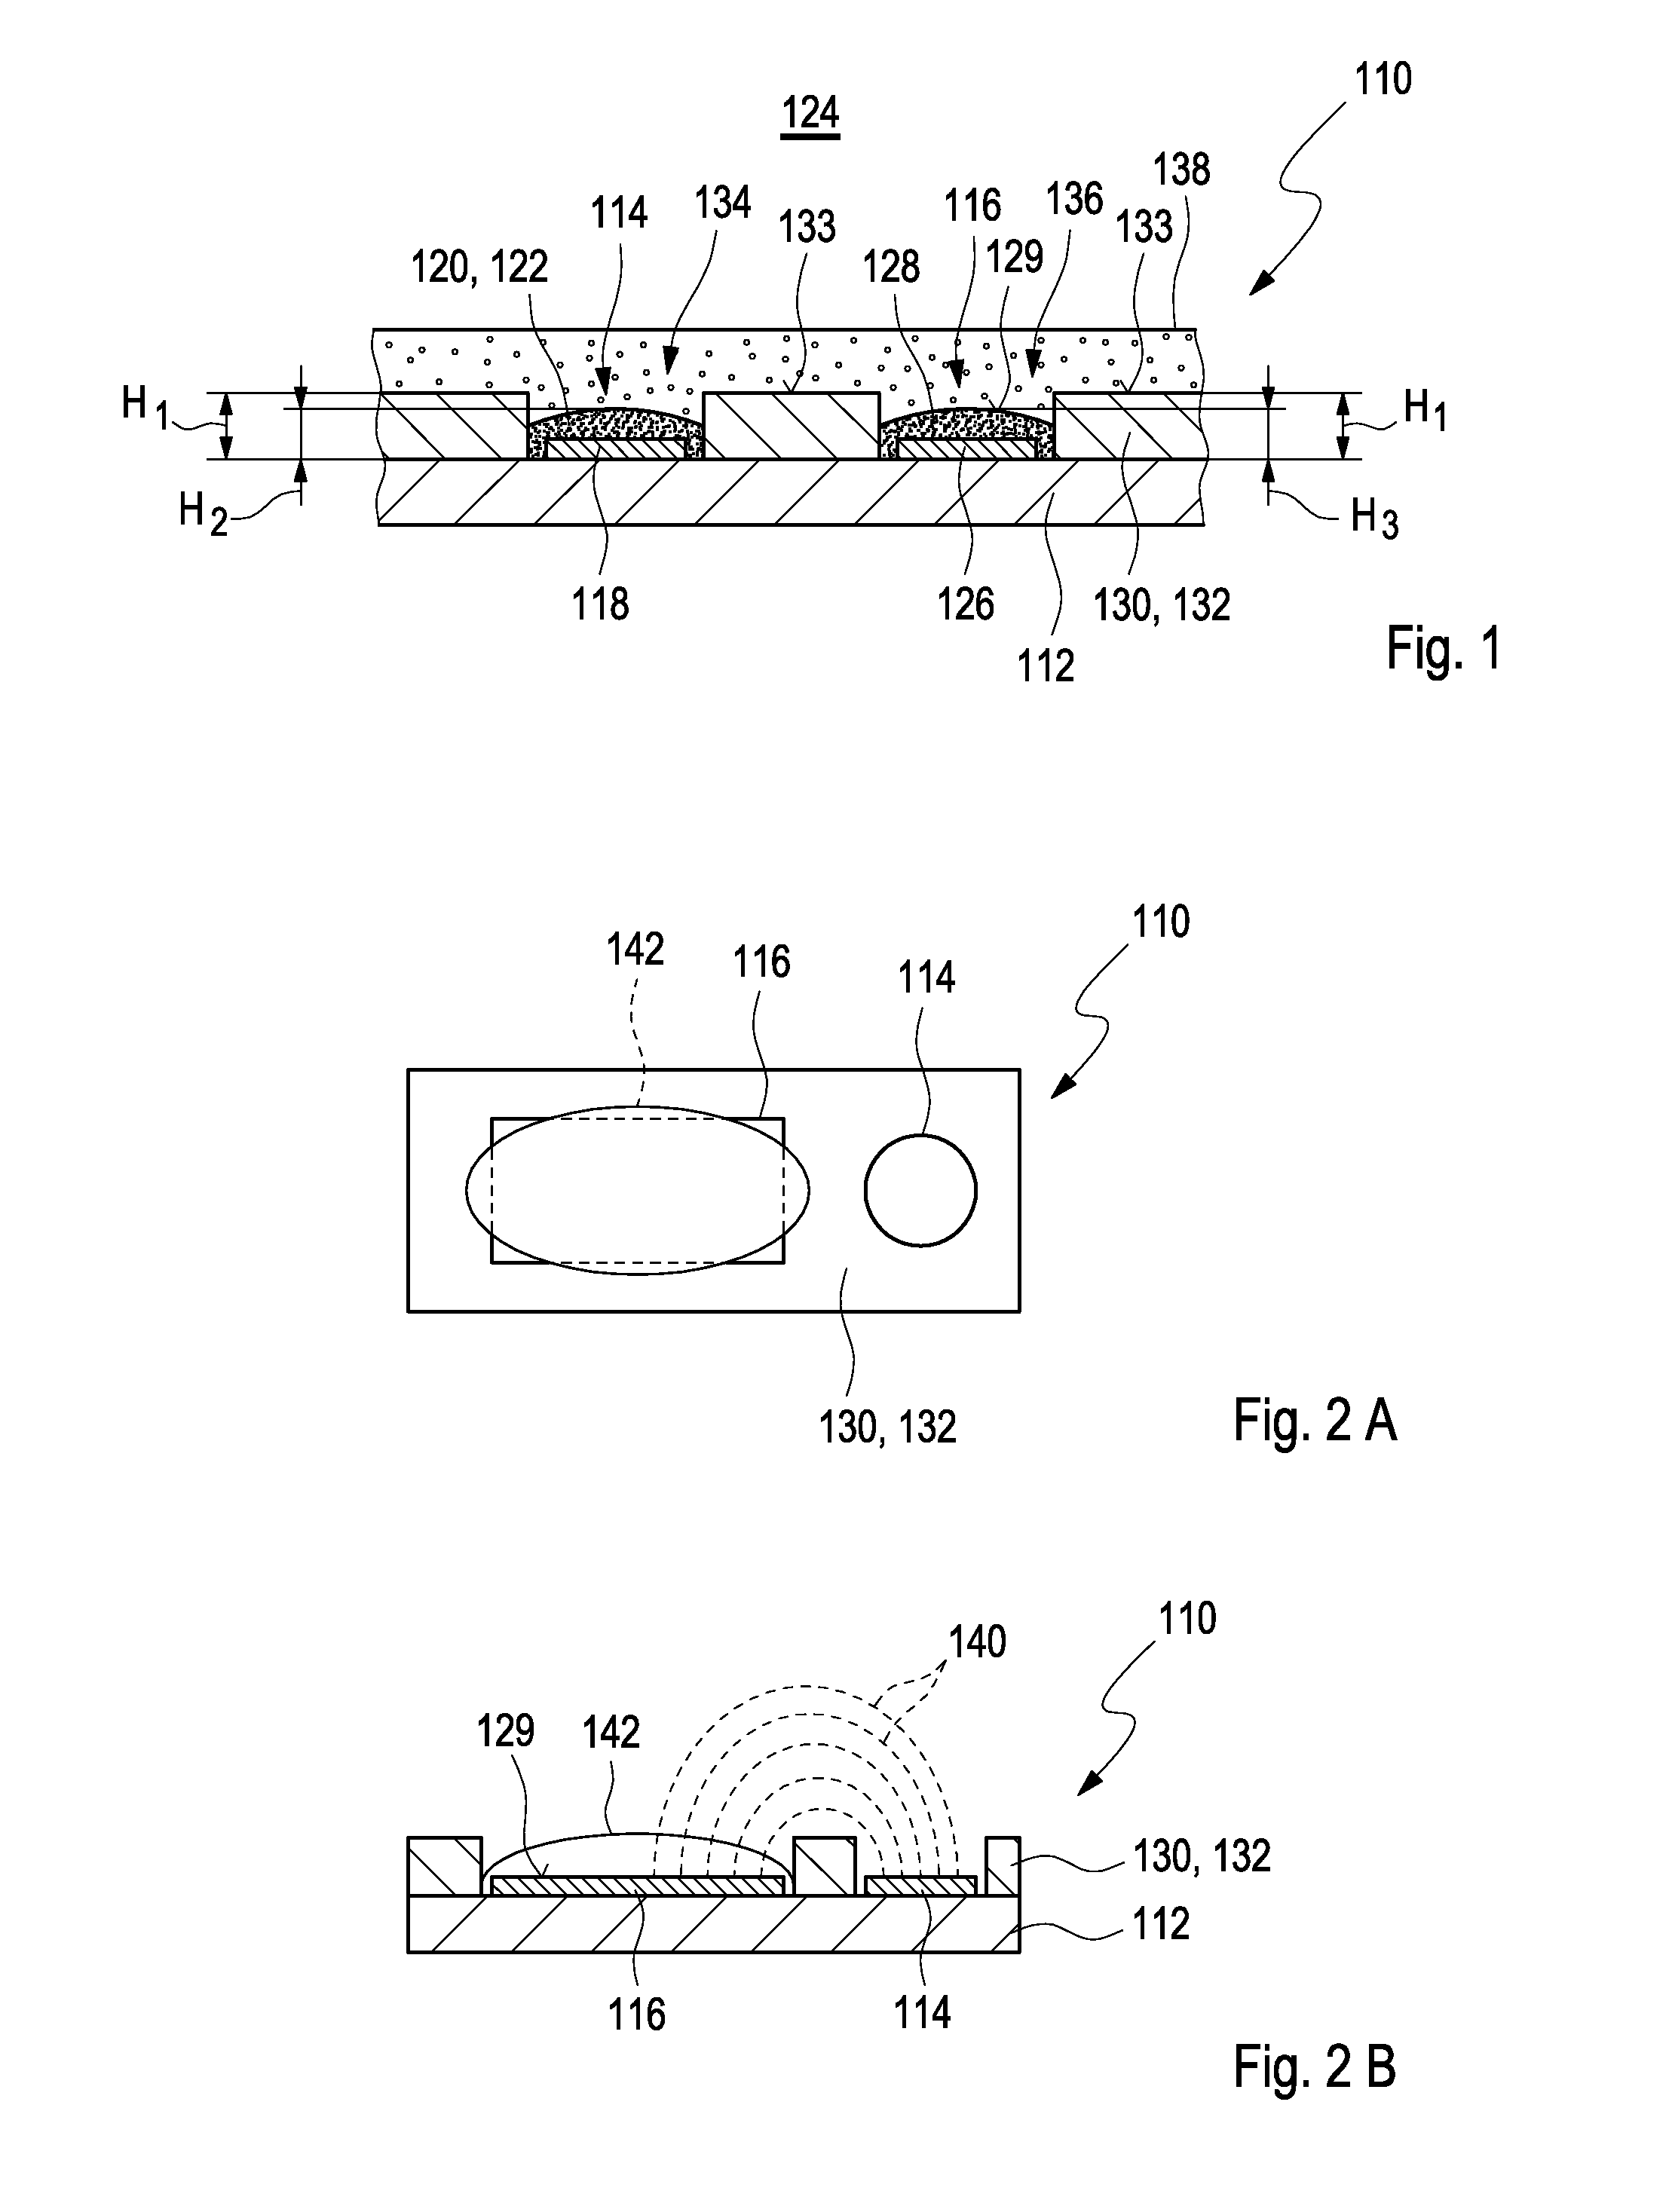 Sensor elements for detecting an analyte in a body fluid sample as well as methods of making the same